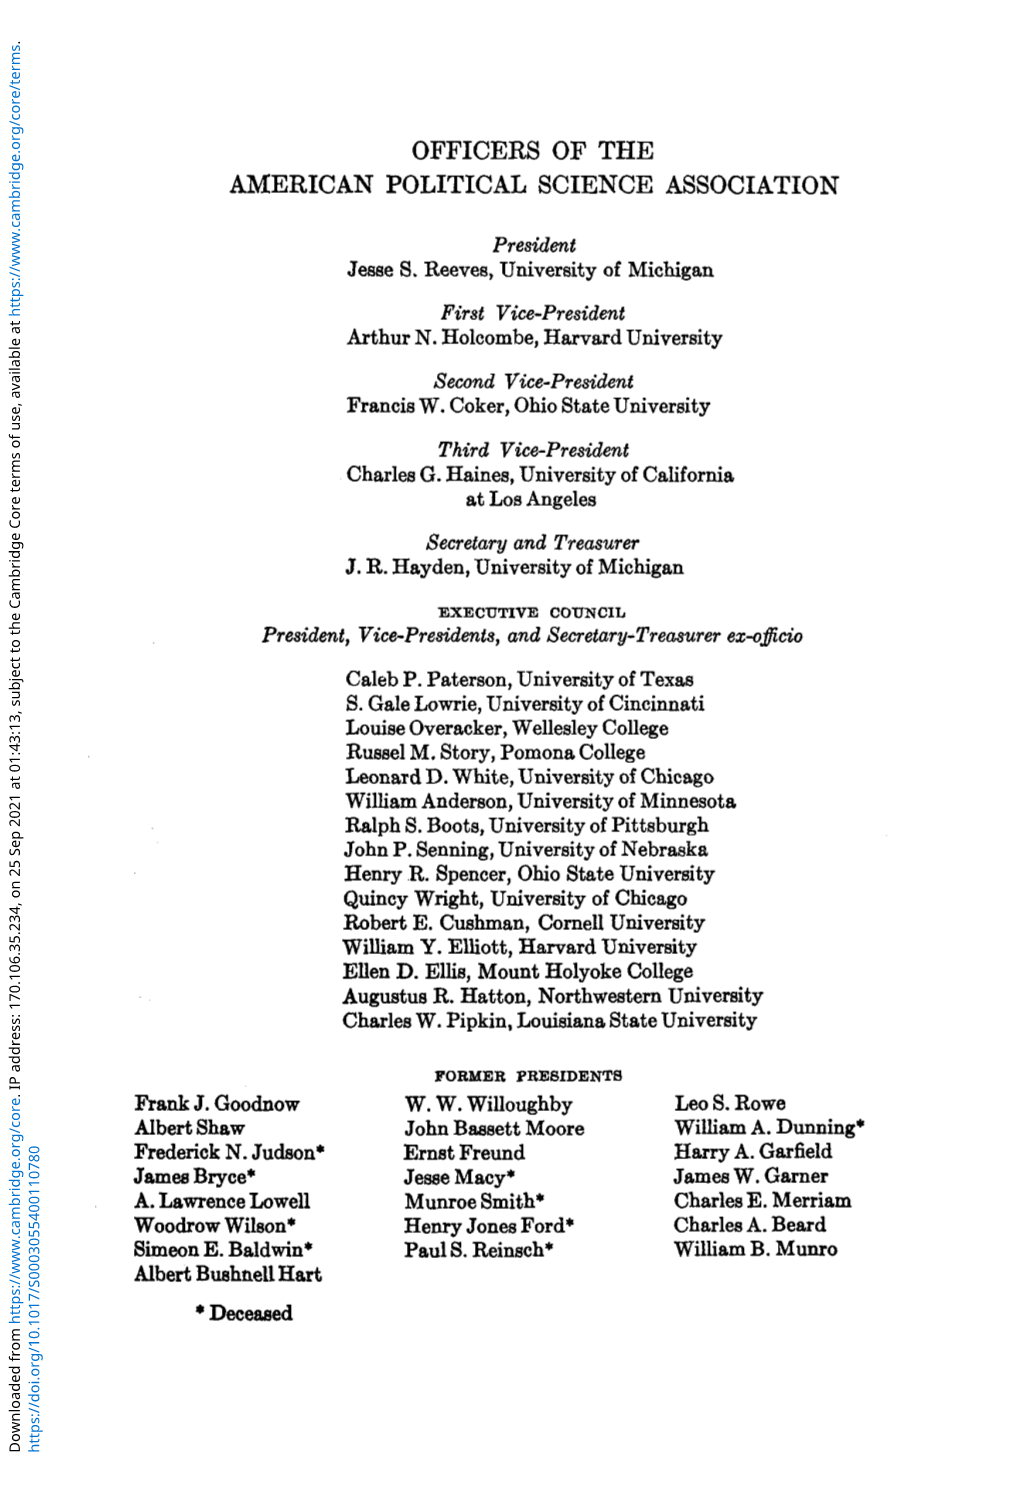 Officers of the American Political Science Association